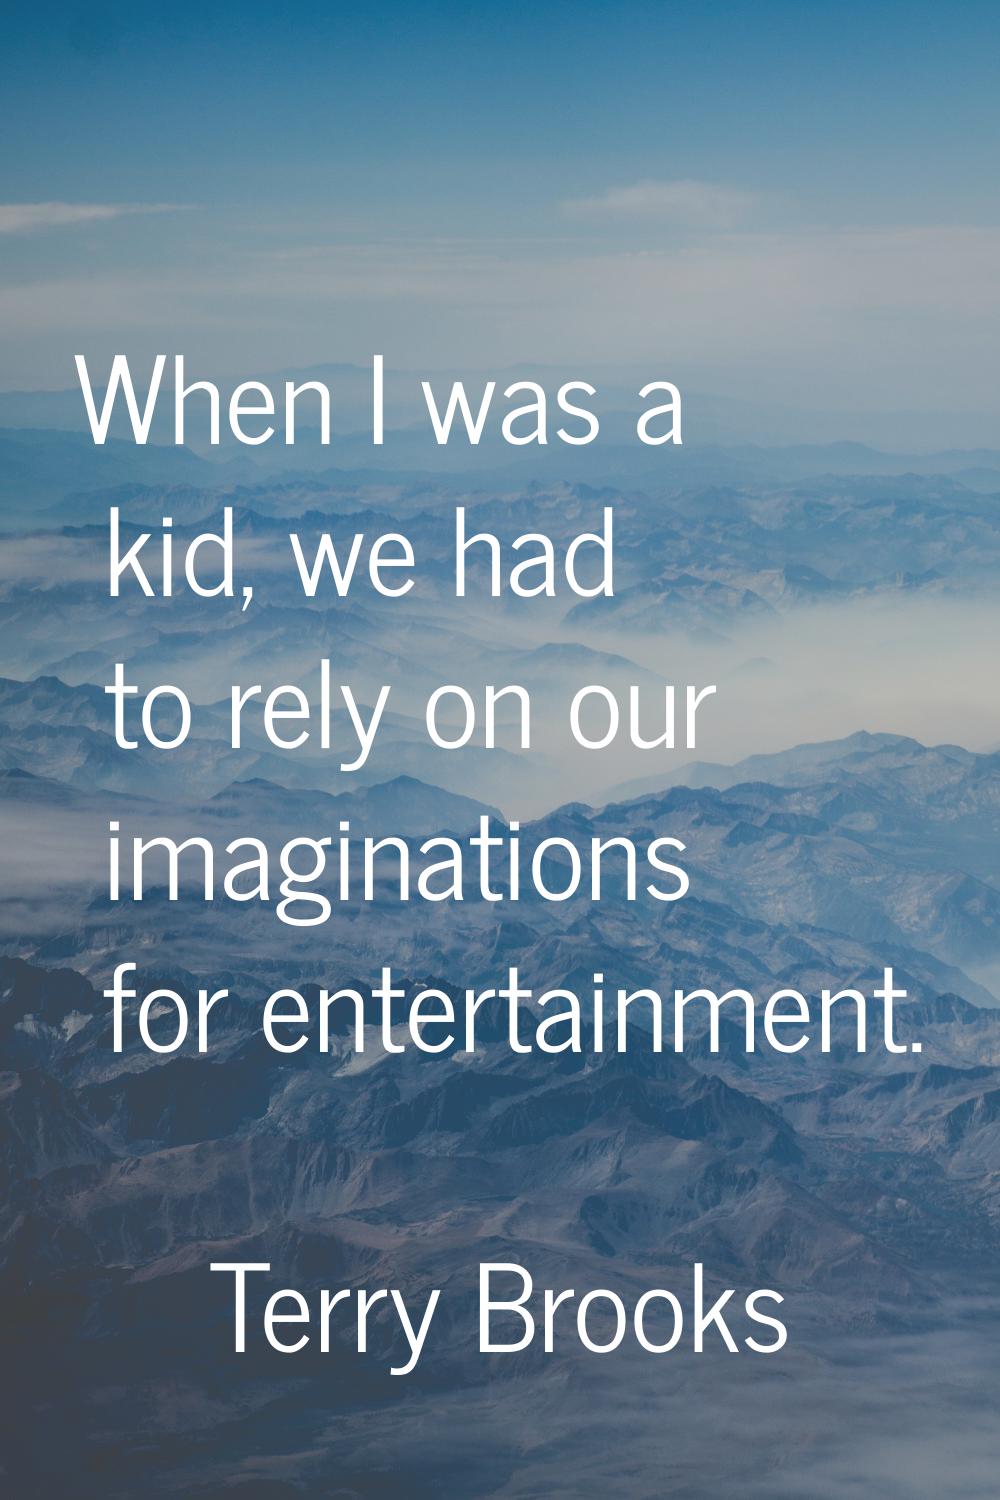 When I was a kid, we had to rely on our imaginations for entertainment.